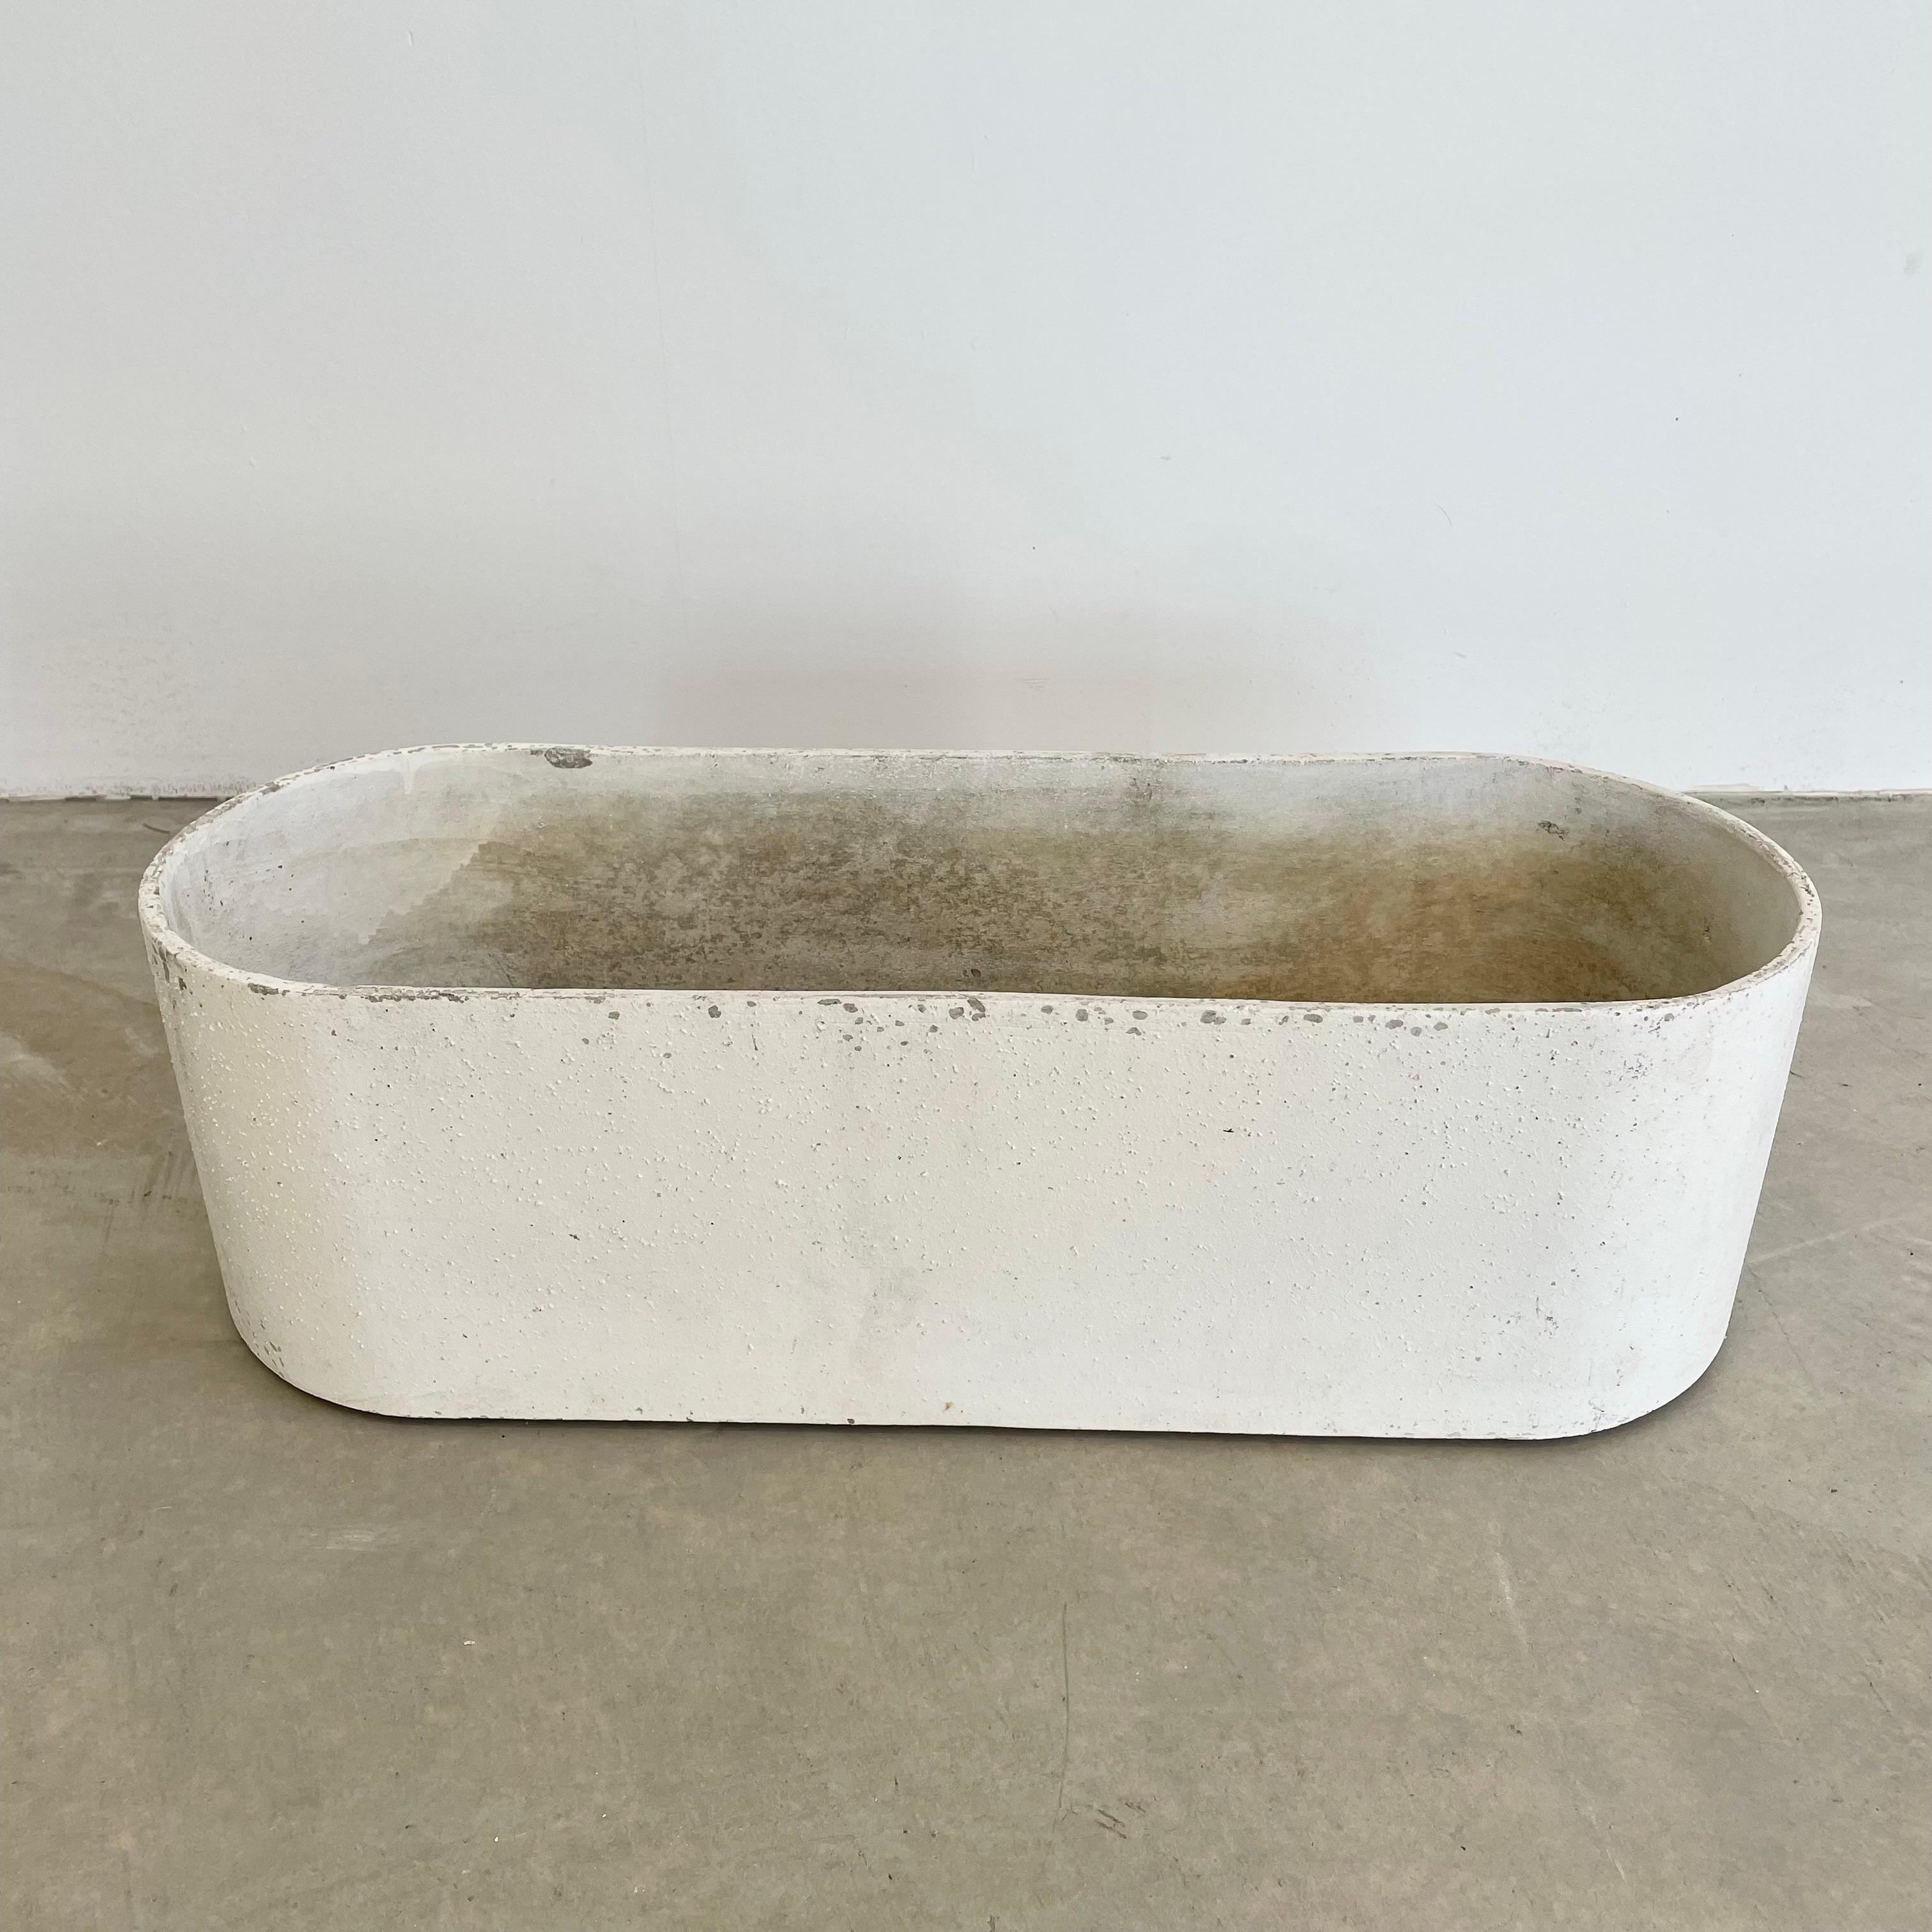 Willy Guhl Concrete Pill Shaped Planters, 1960s Switzerland For Sale 7